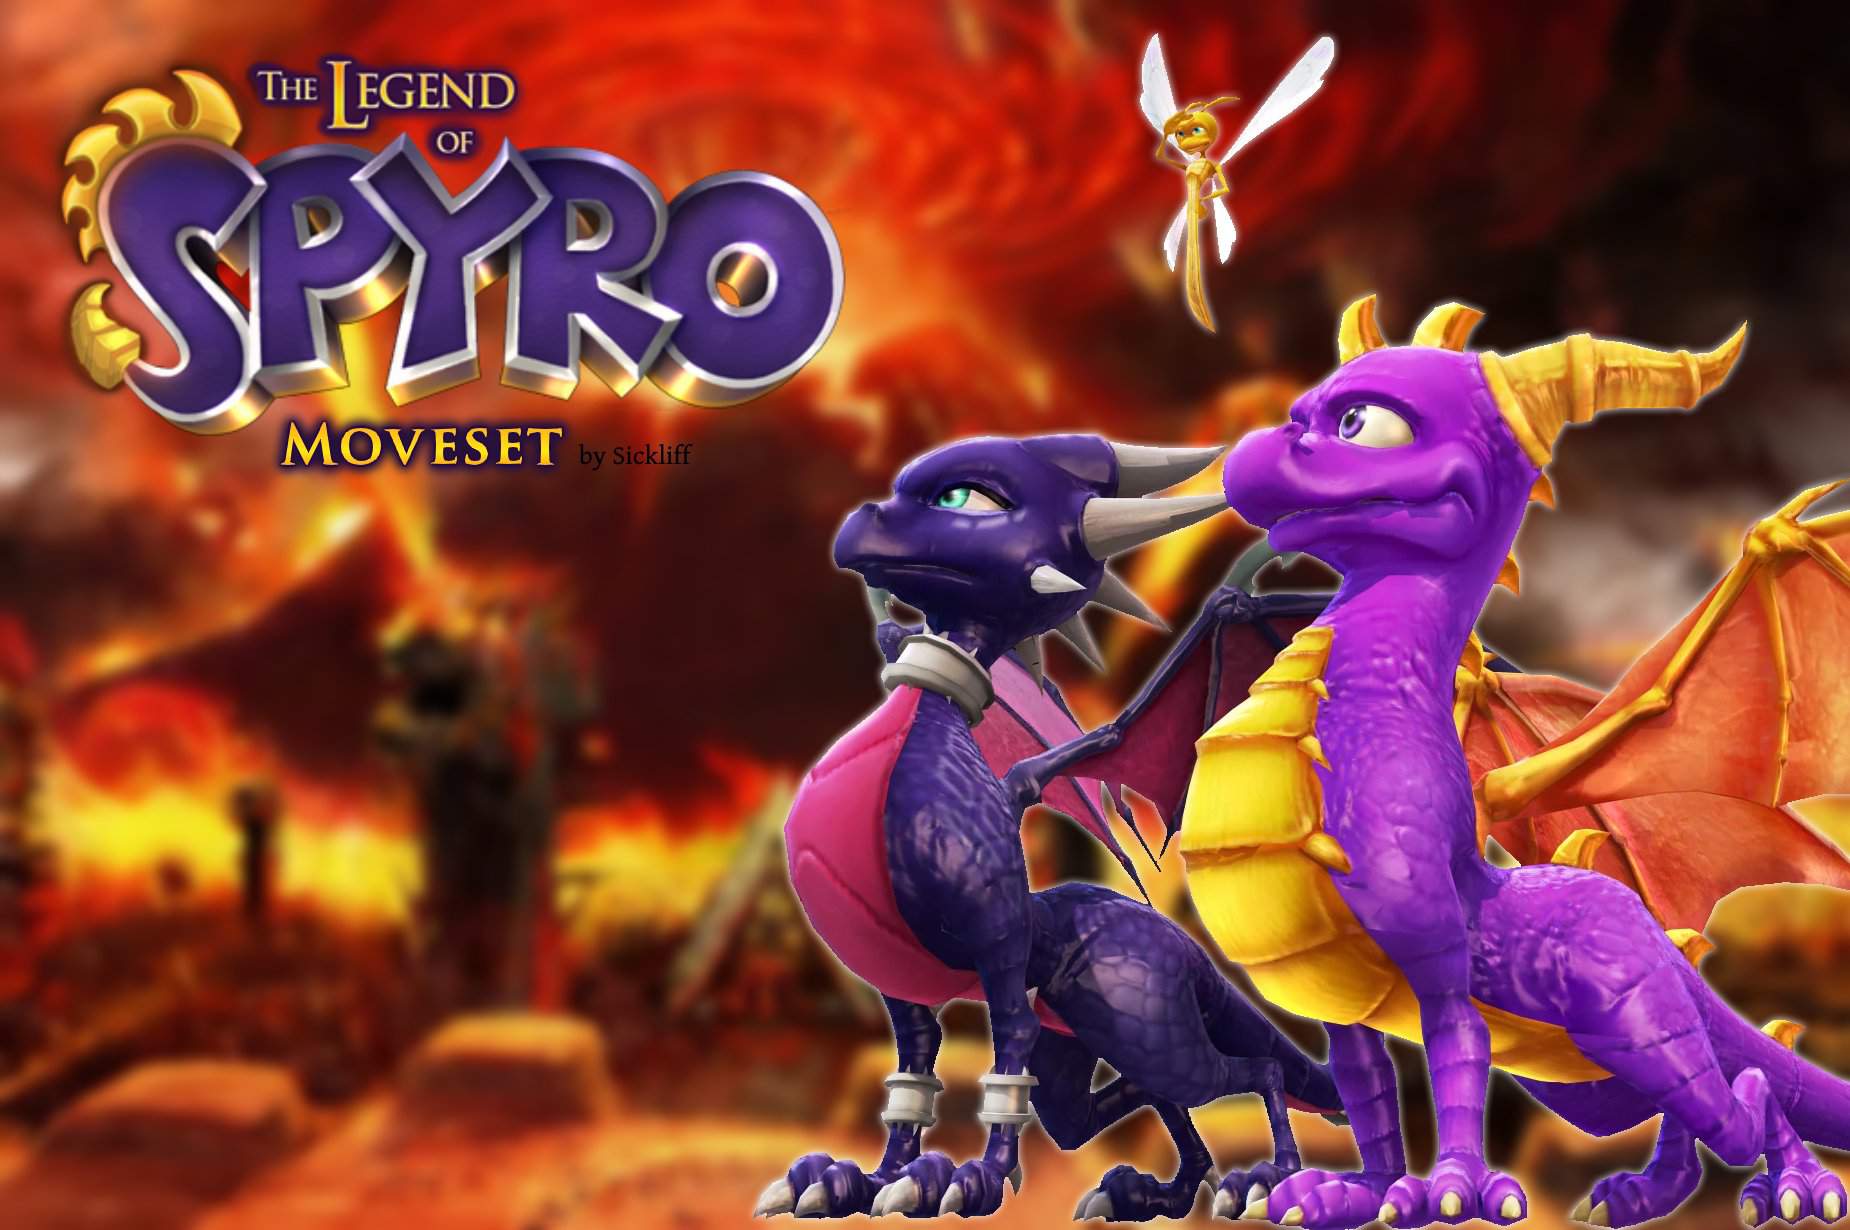 does spyro the dragon have all three games on it